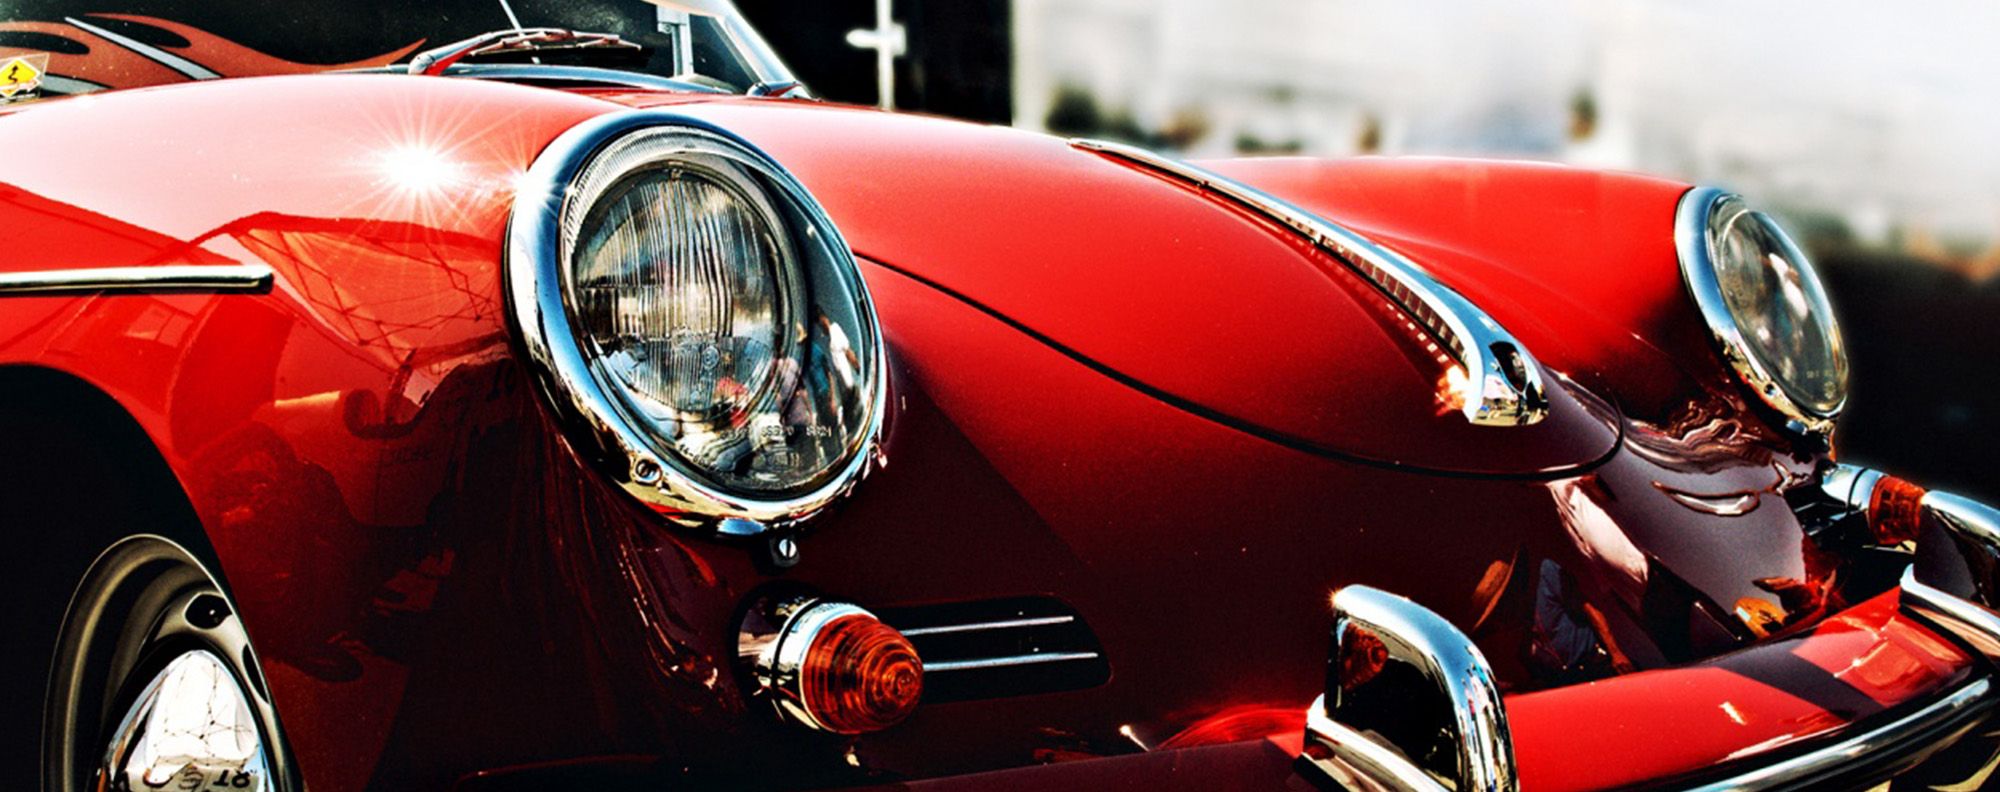 Front view of red classic car